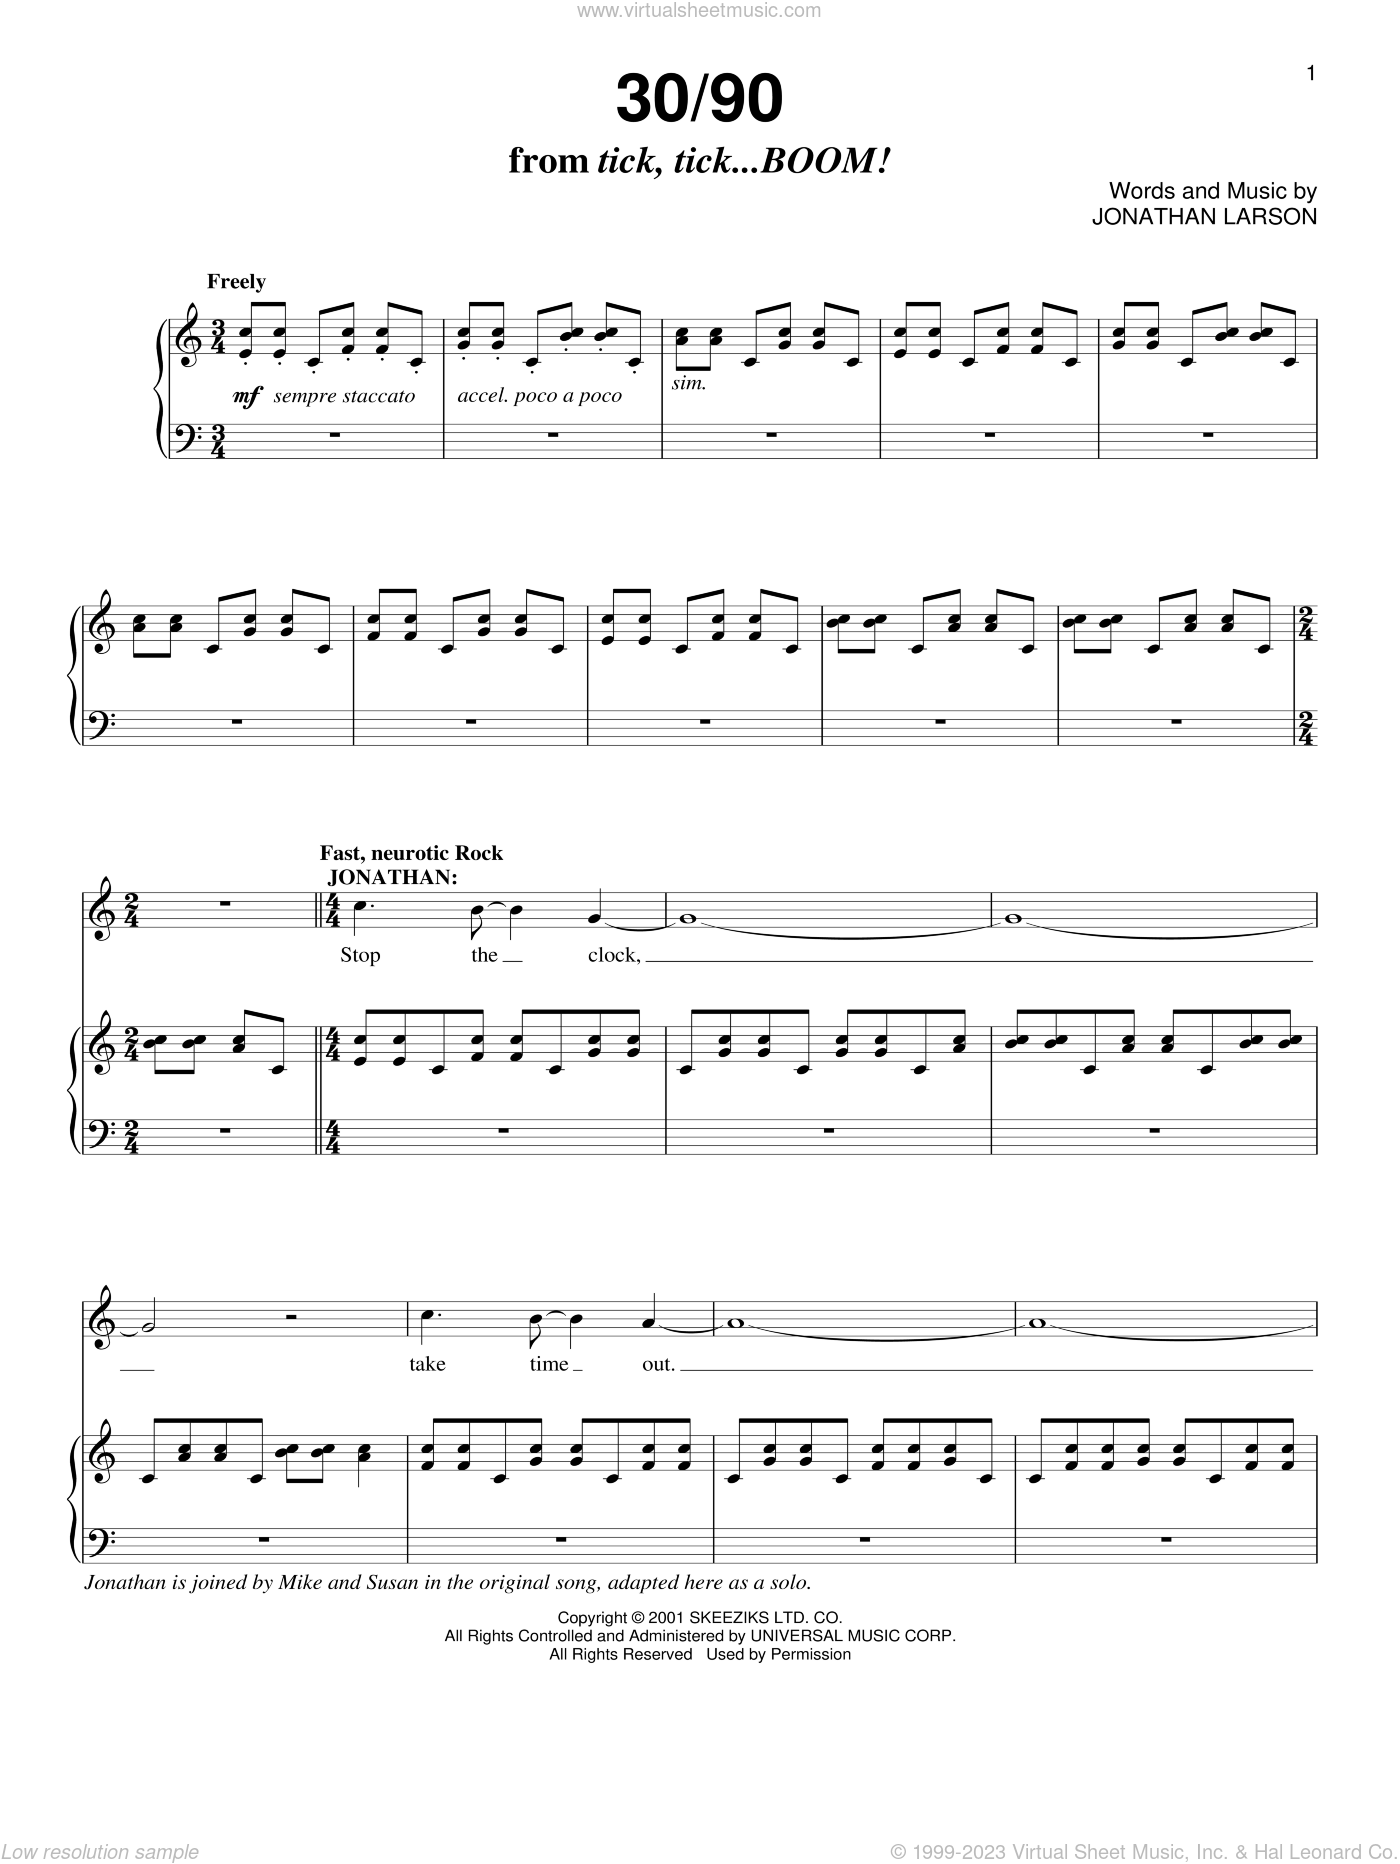 Larson - 30/90 (from tick, tick... BOOM!) sheet music for voice and piano